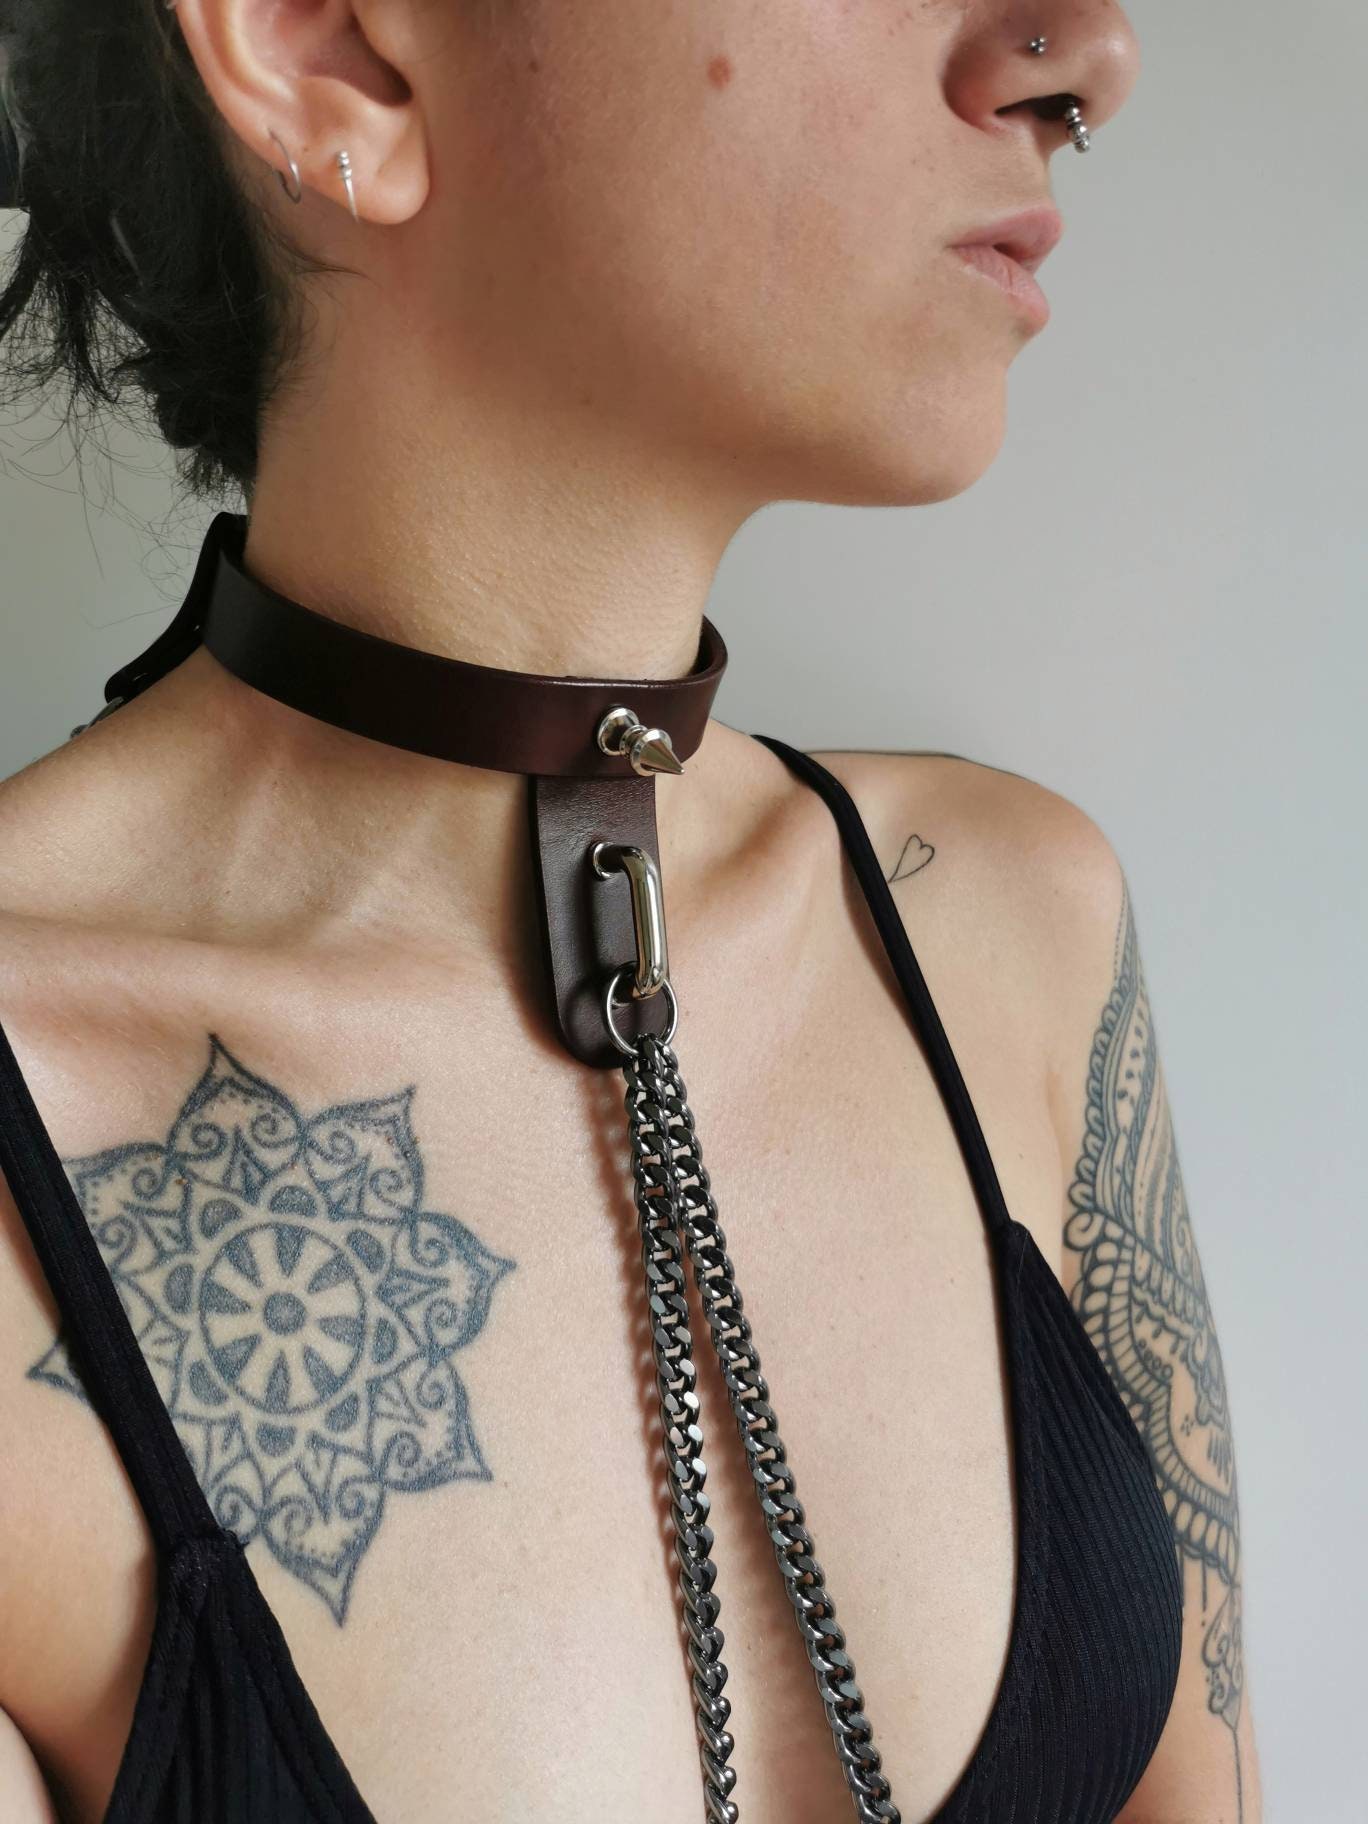 ANDROMEDA Body Chain Collar Leather Choker Genuine Leather pic